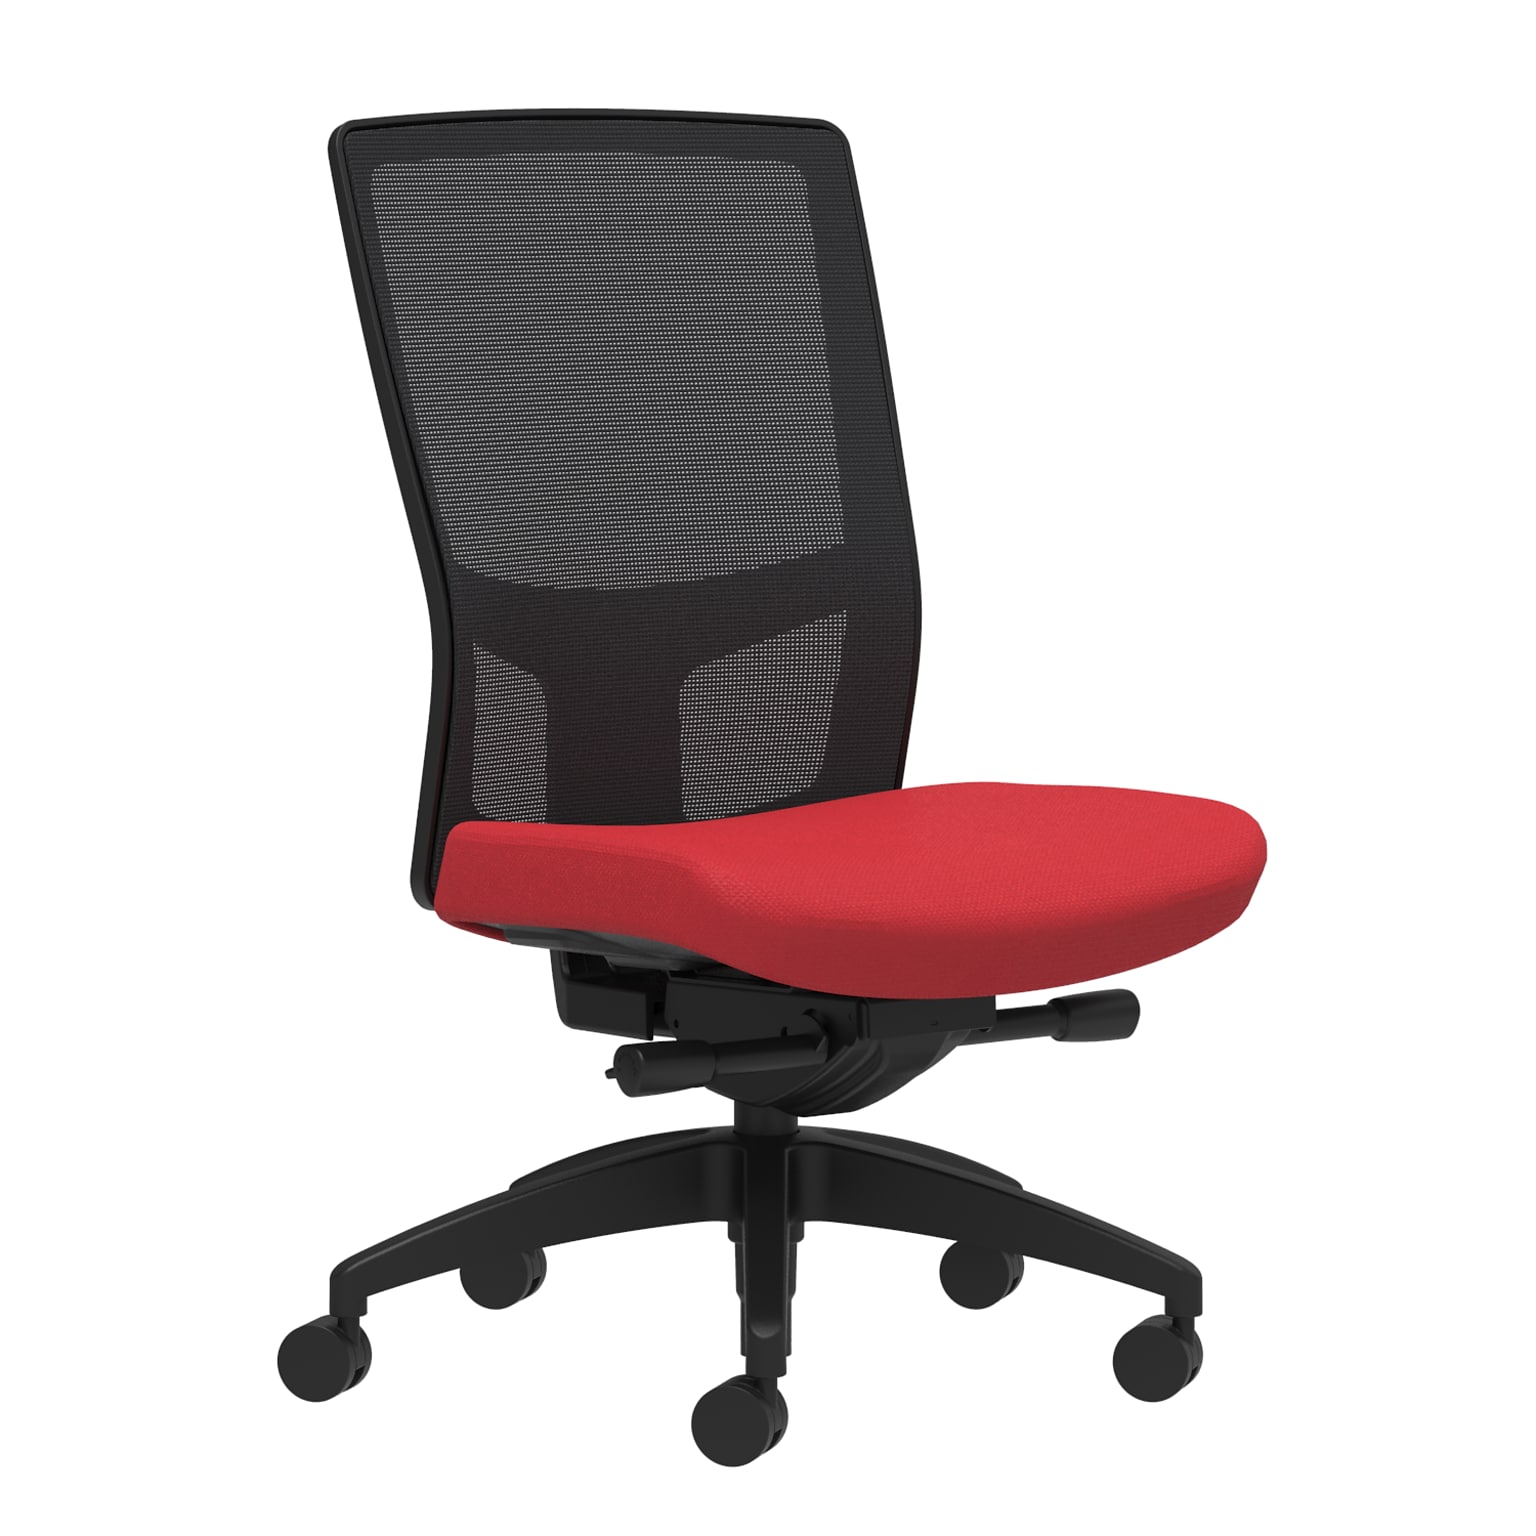 Union & Scale Workplace2.0™ Fabric Task Chair, Cherry, Integrated Lumbar, Armless, Advanced Synchro-Tilt Seat Control (53652)